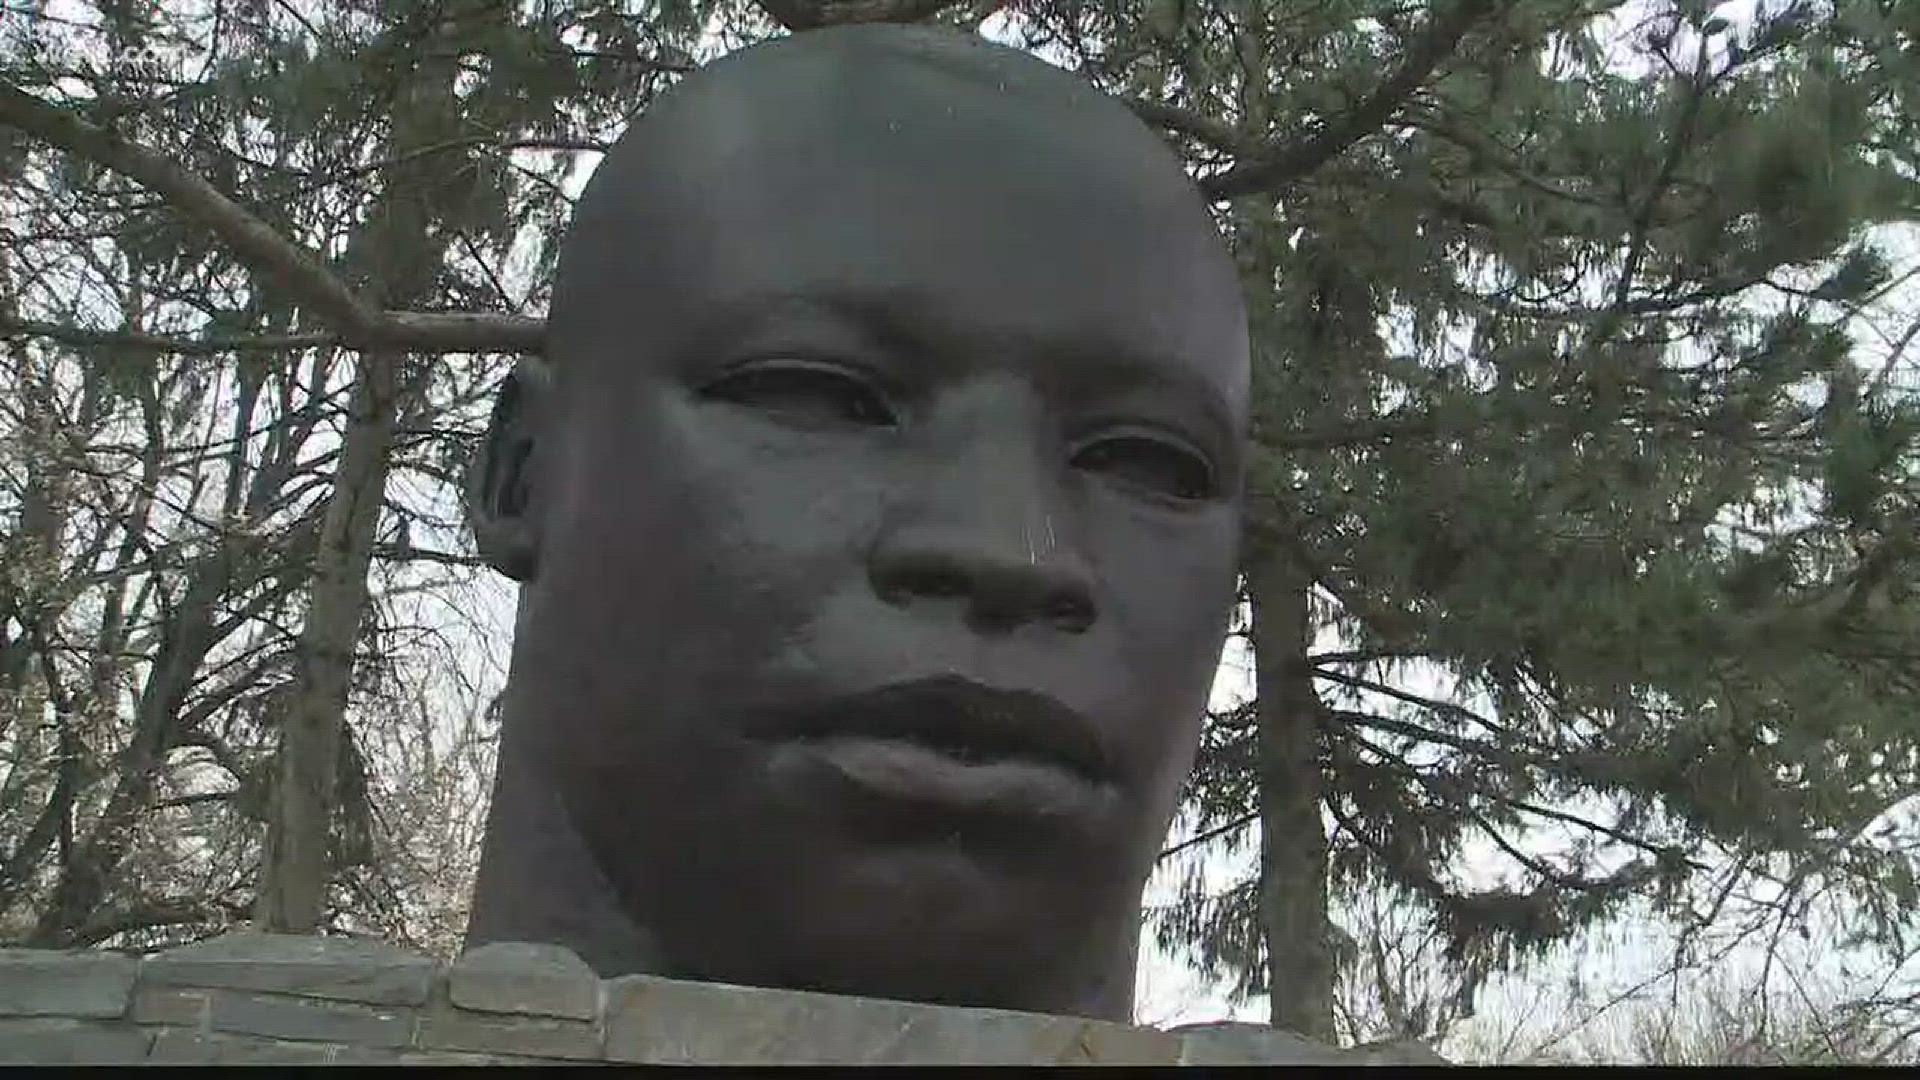 Activist wants Dr. King statue replaced